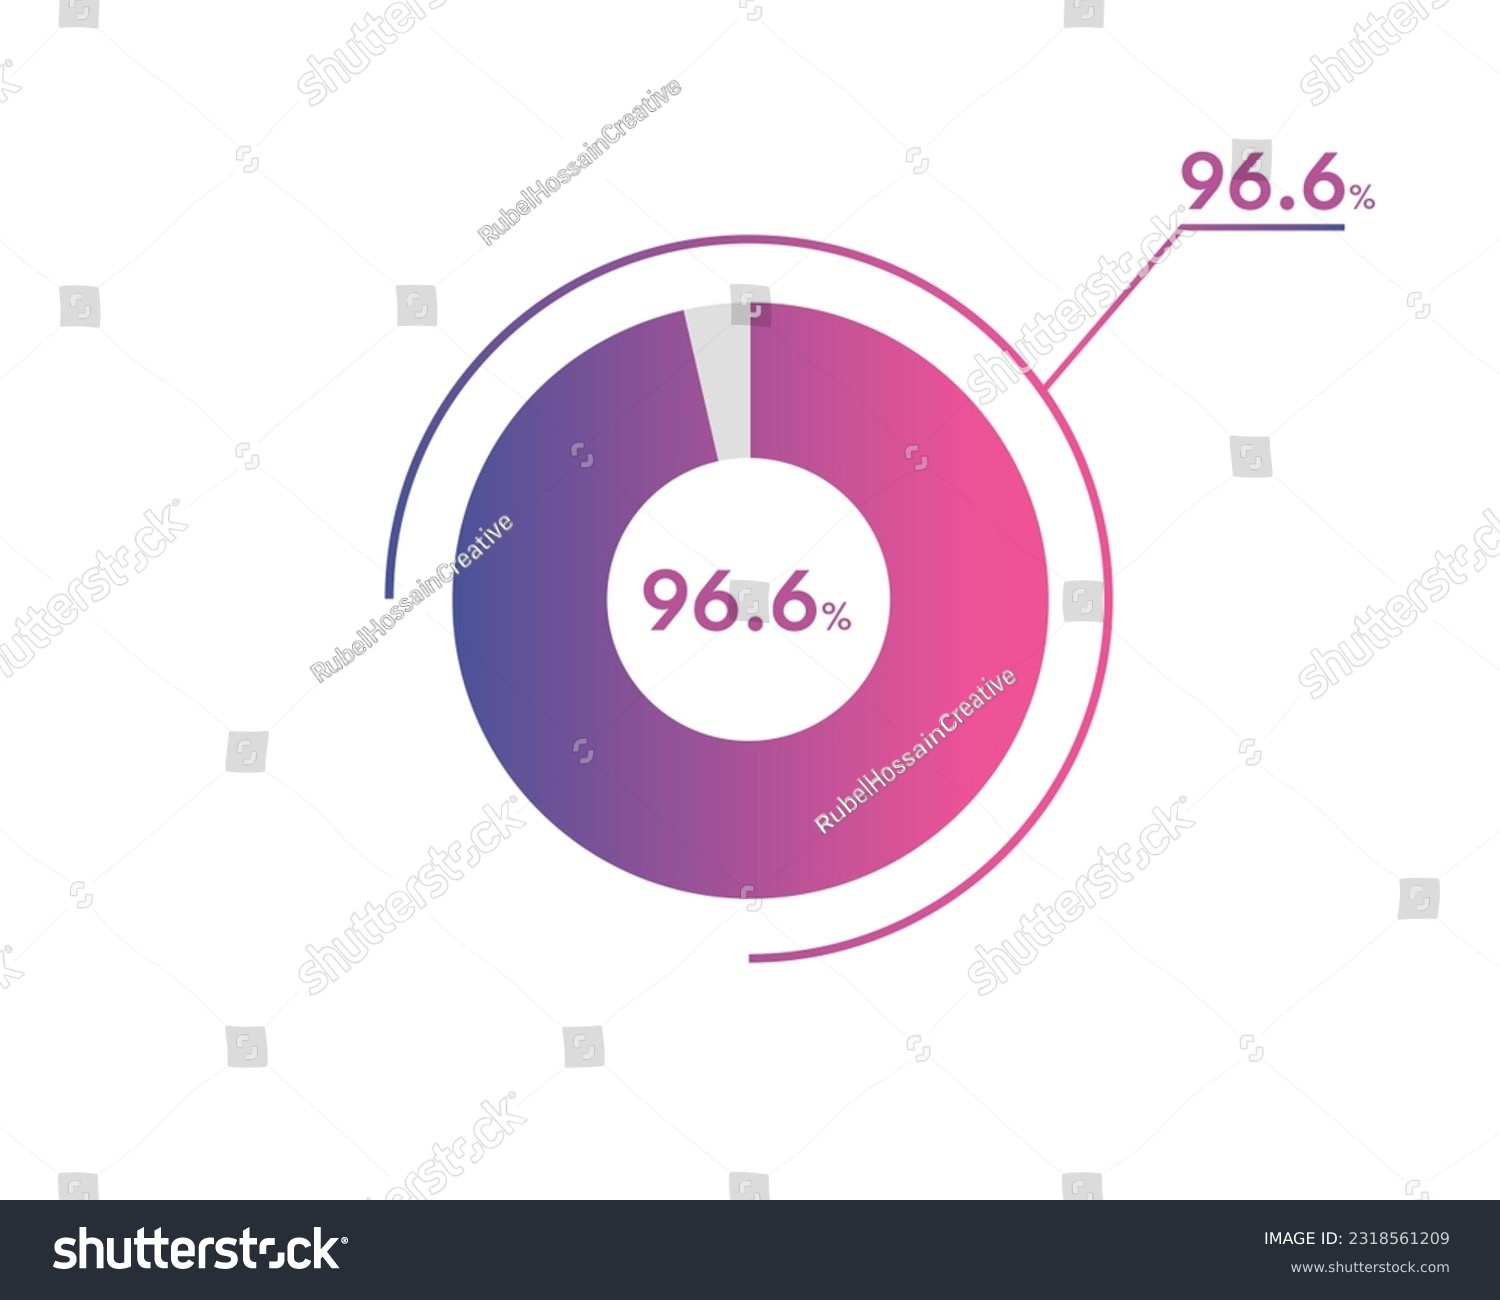 SVG of 96.6 Percentage circle diagrams Infographics vector, circle diagram business illustration, Designing the 96.6% Segment in the Pie Chart. svg